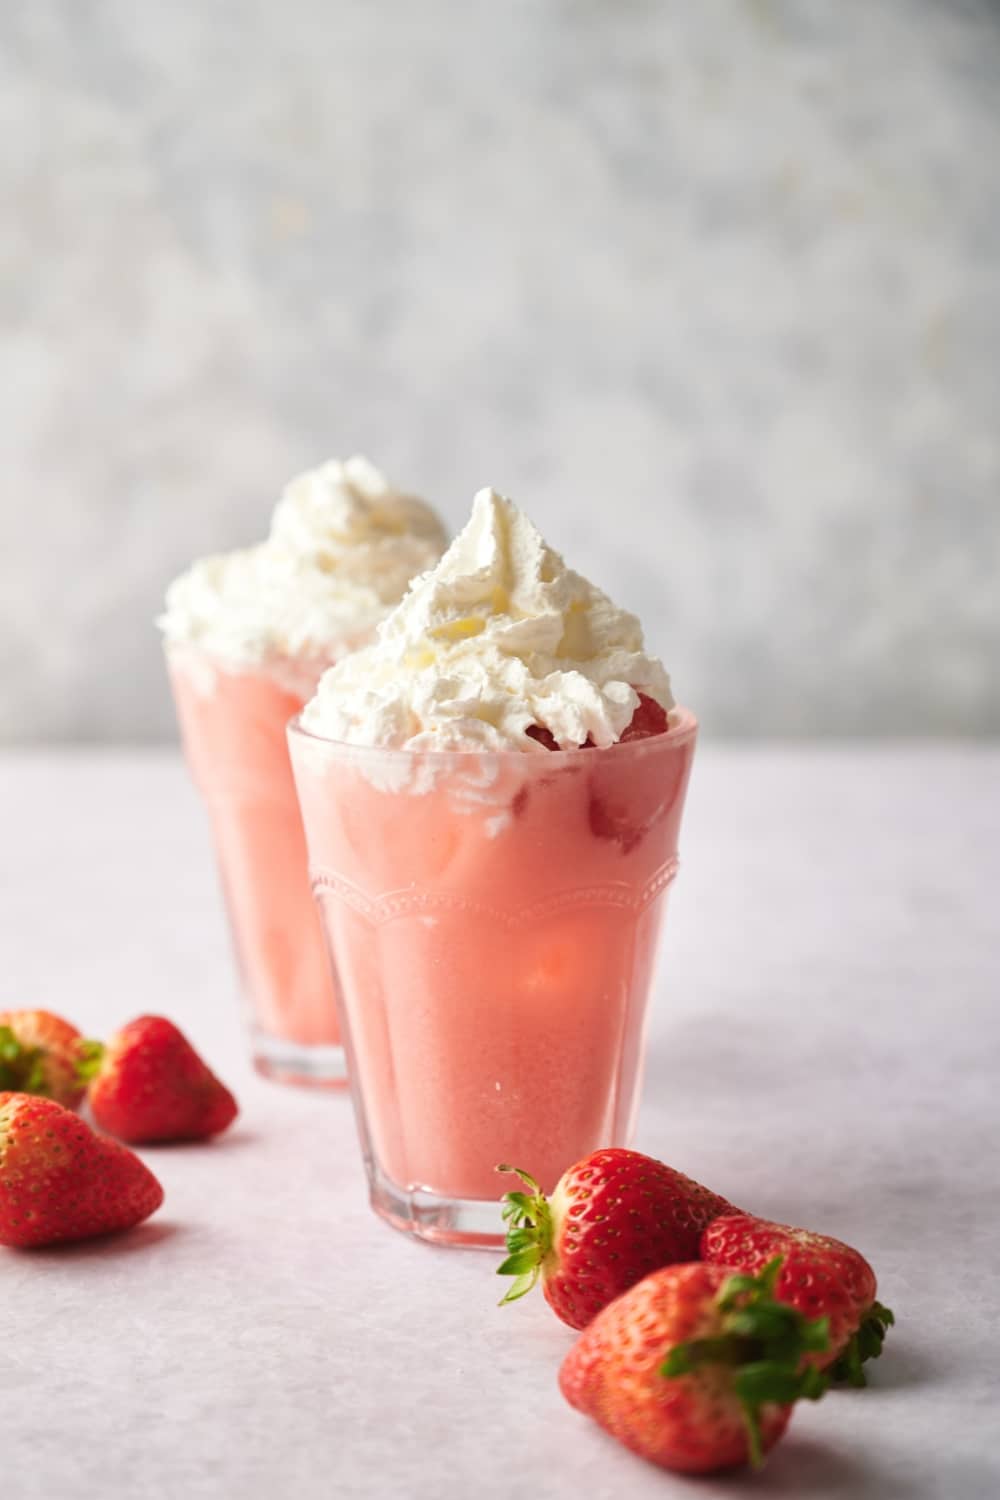 Two glasses filled with pink drink with whipped cream on top and some strawberries around them.